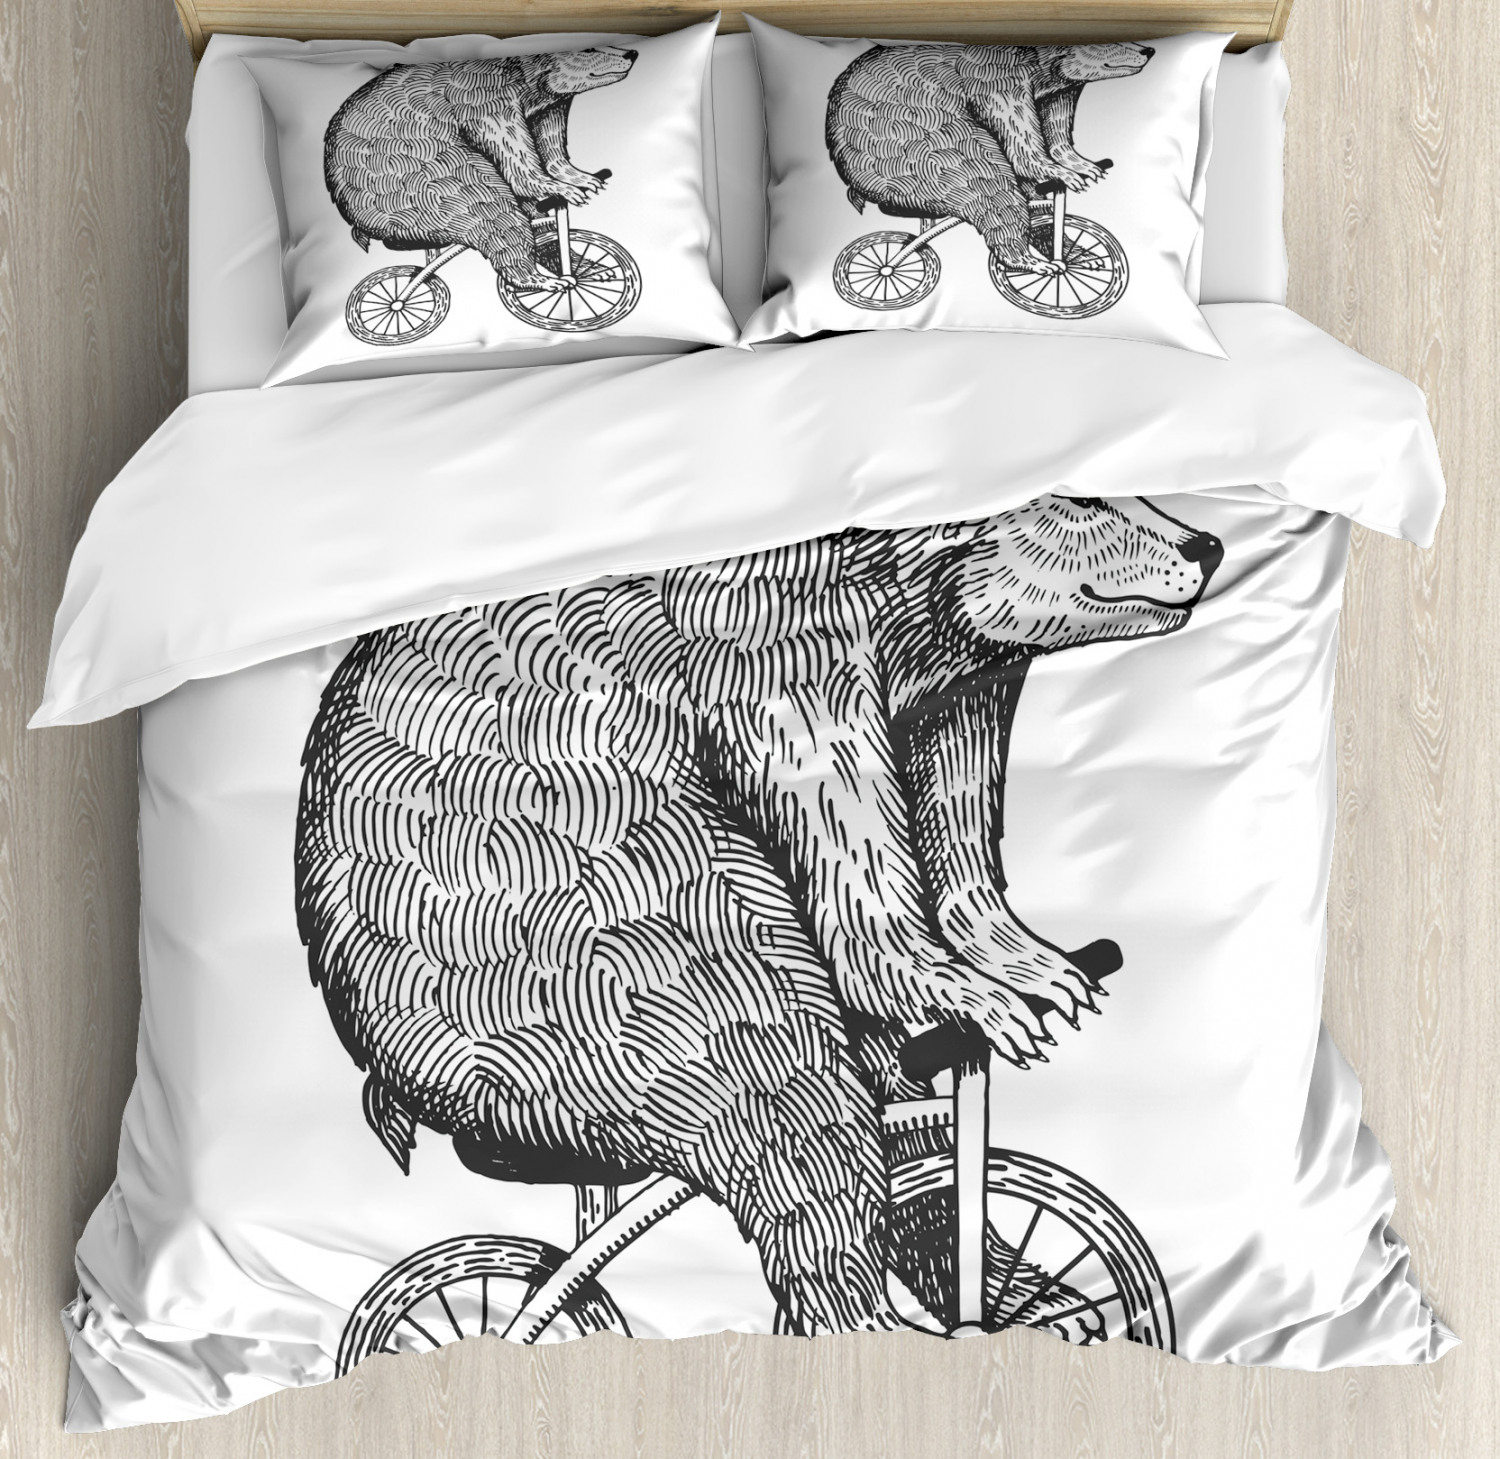 Bicycle Duvet Cover Set Twin Queen King Sizes With Pillow Shams